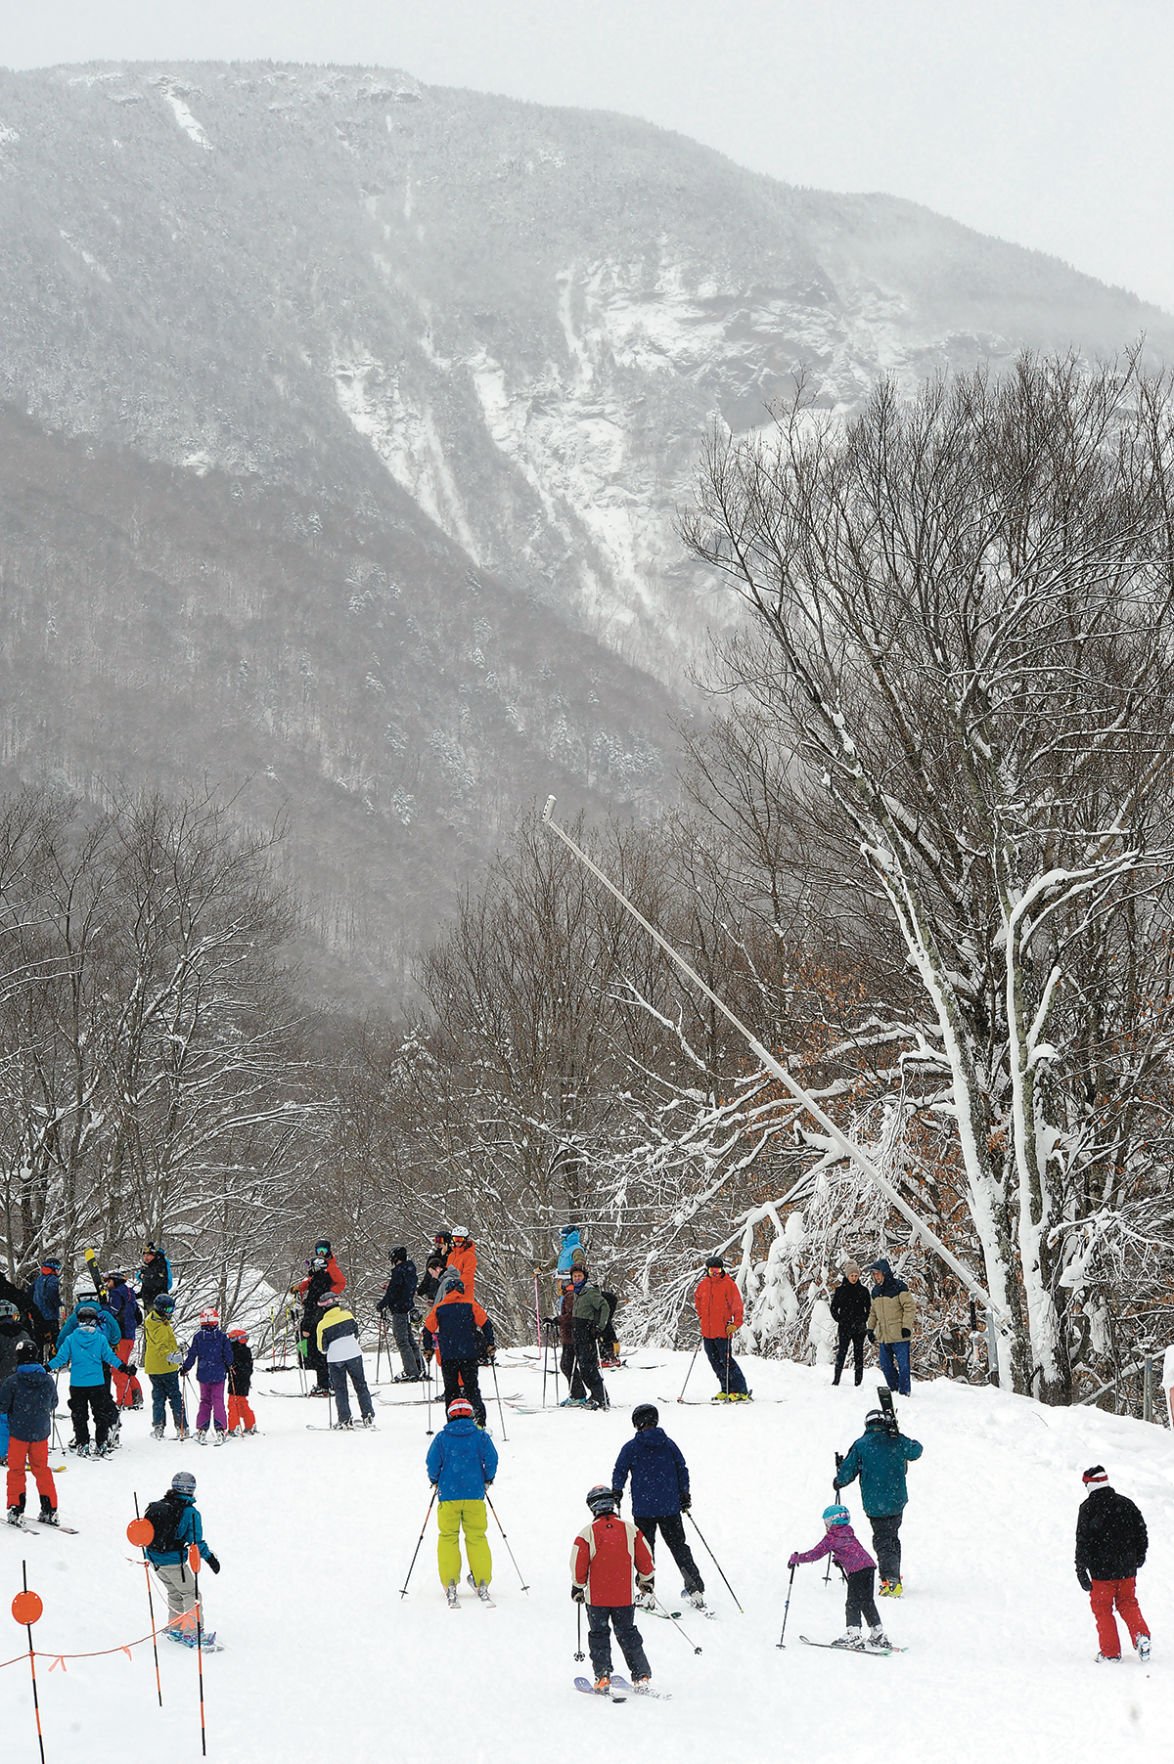 Opening day at Stowe Mountain Resort Local News